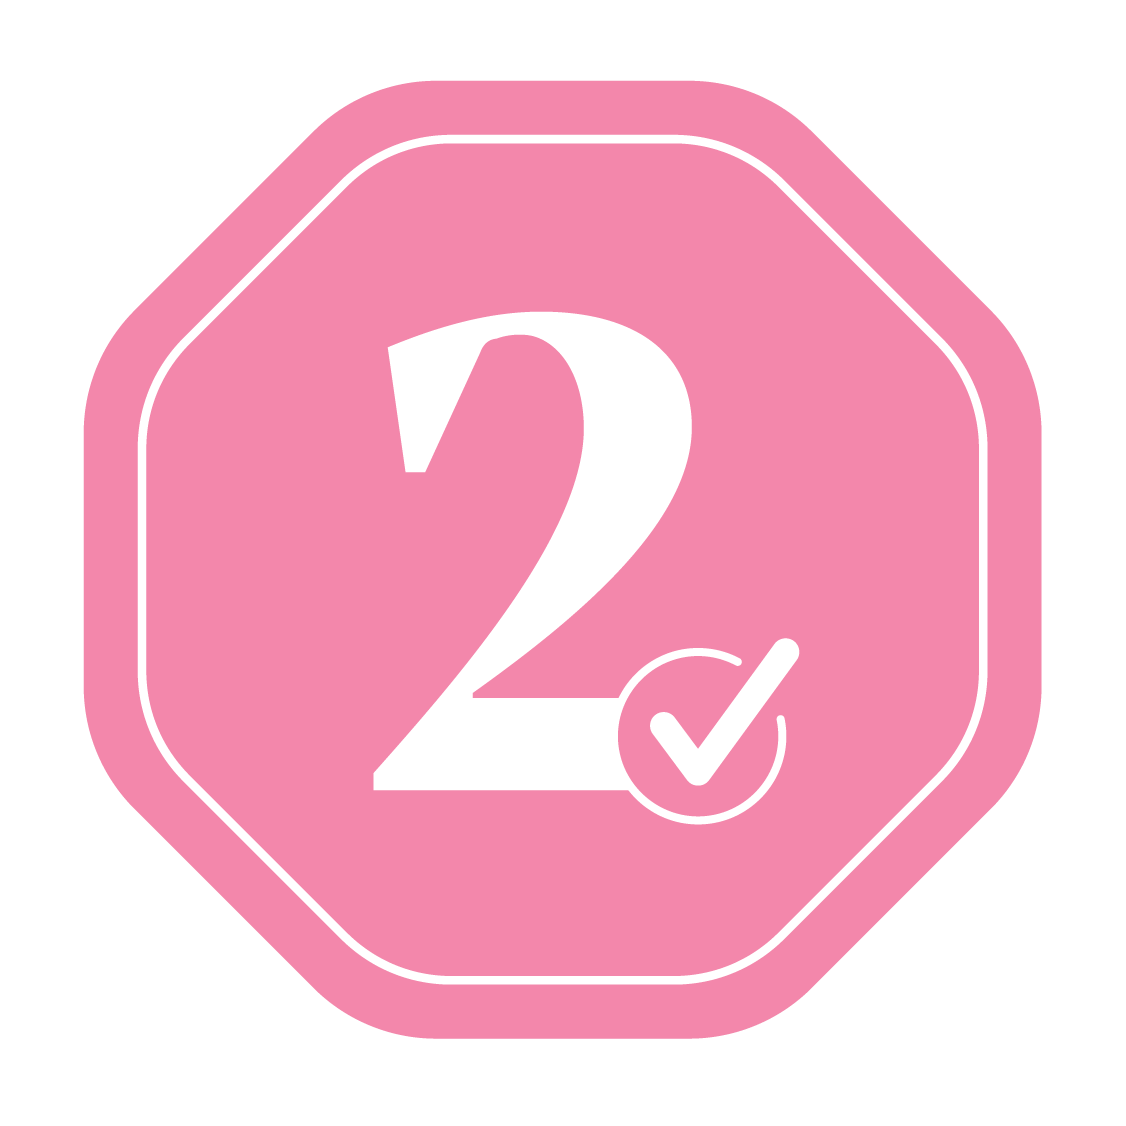 It takes two challenge badge